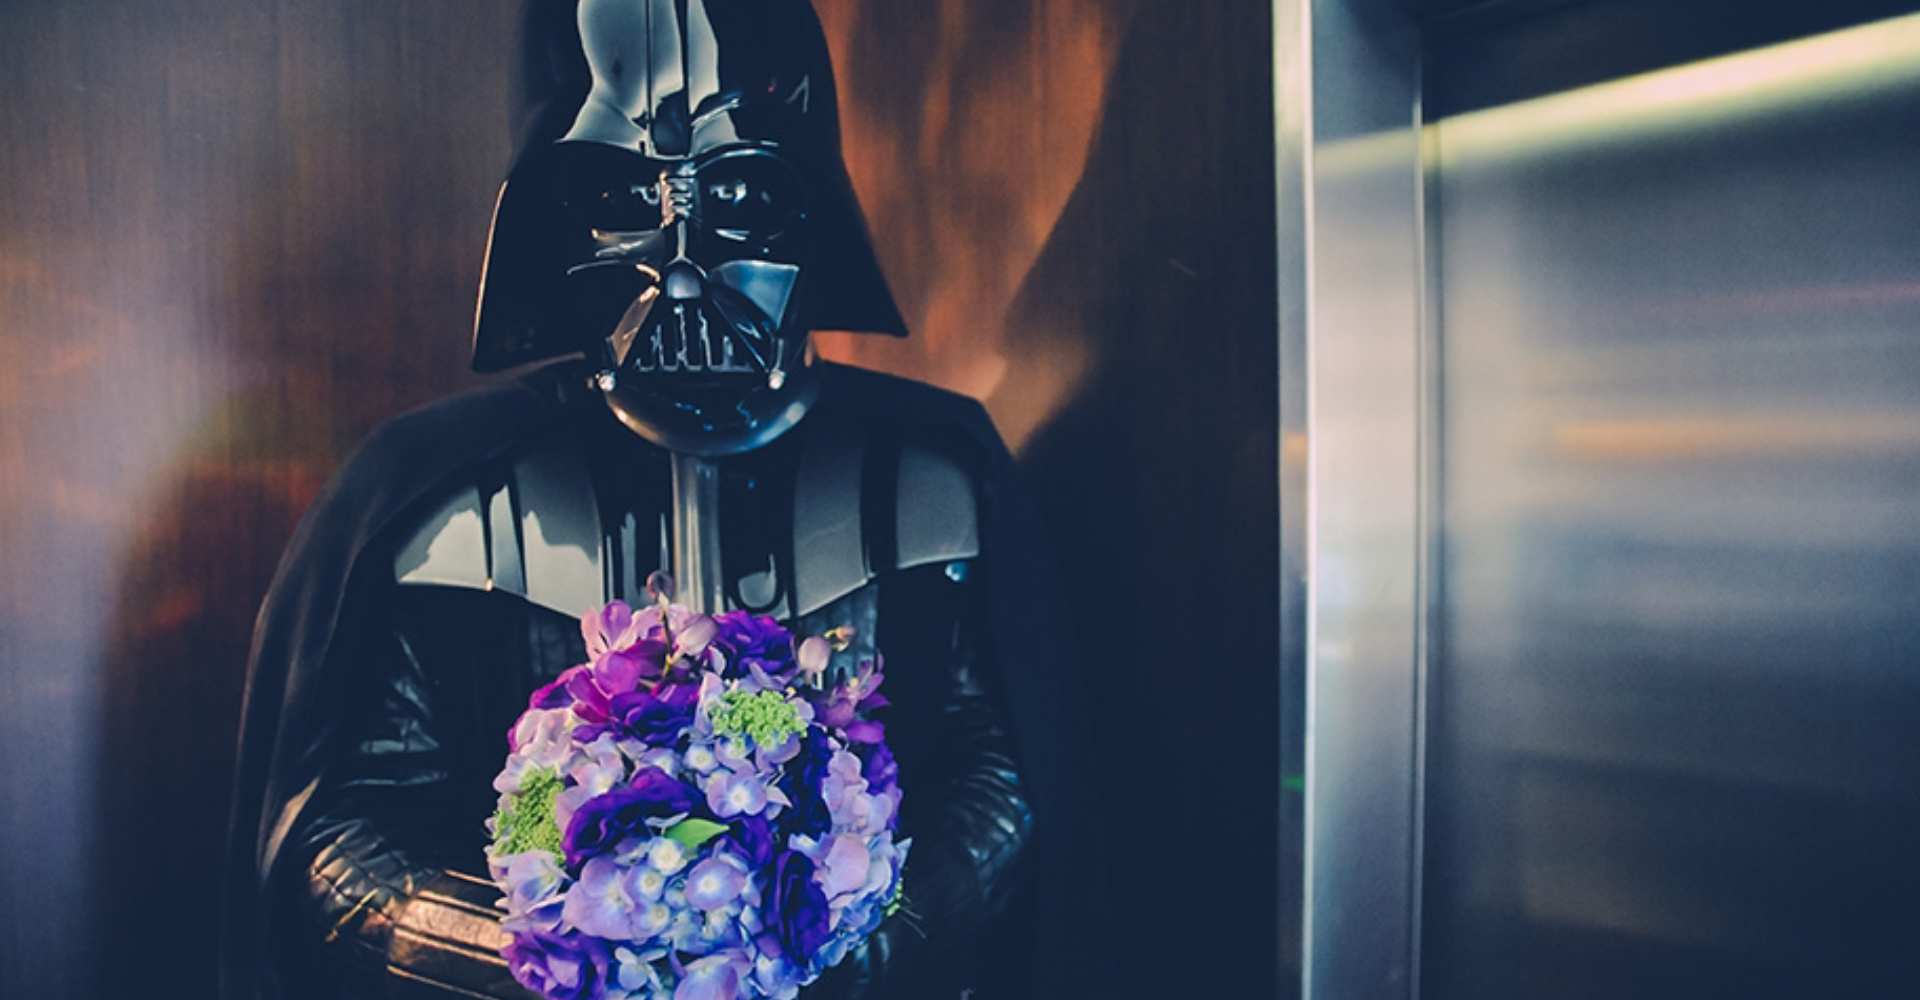 What if Darth Vader Was Your VIP Guest?